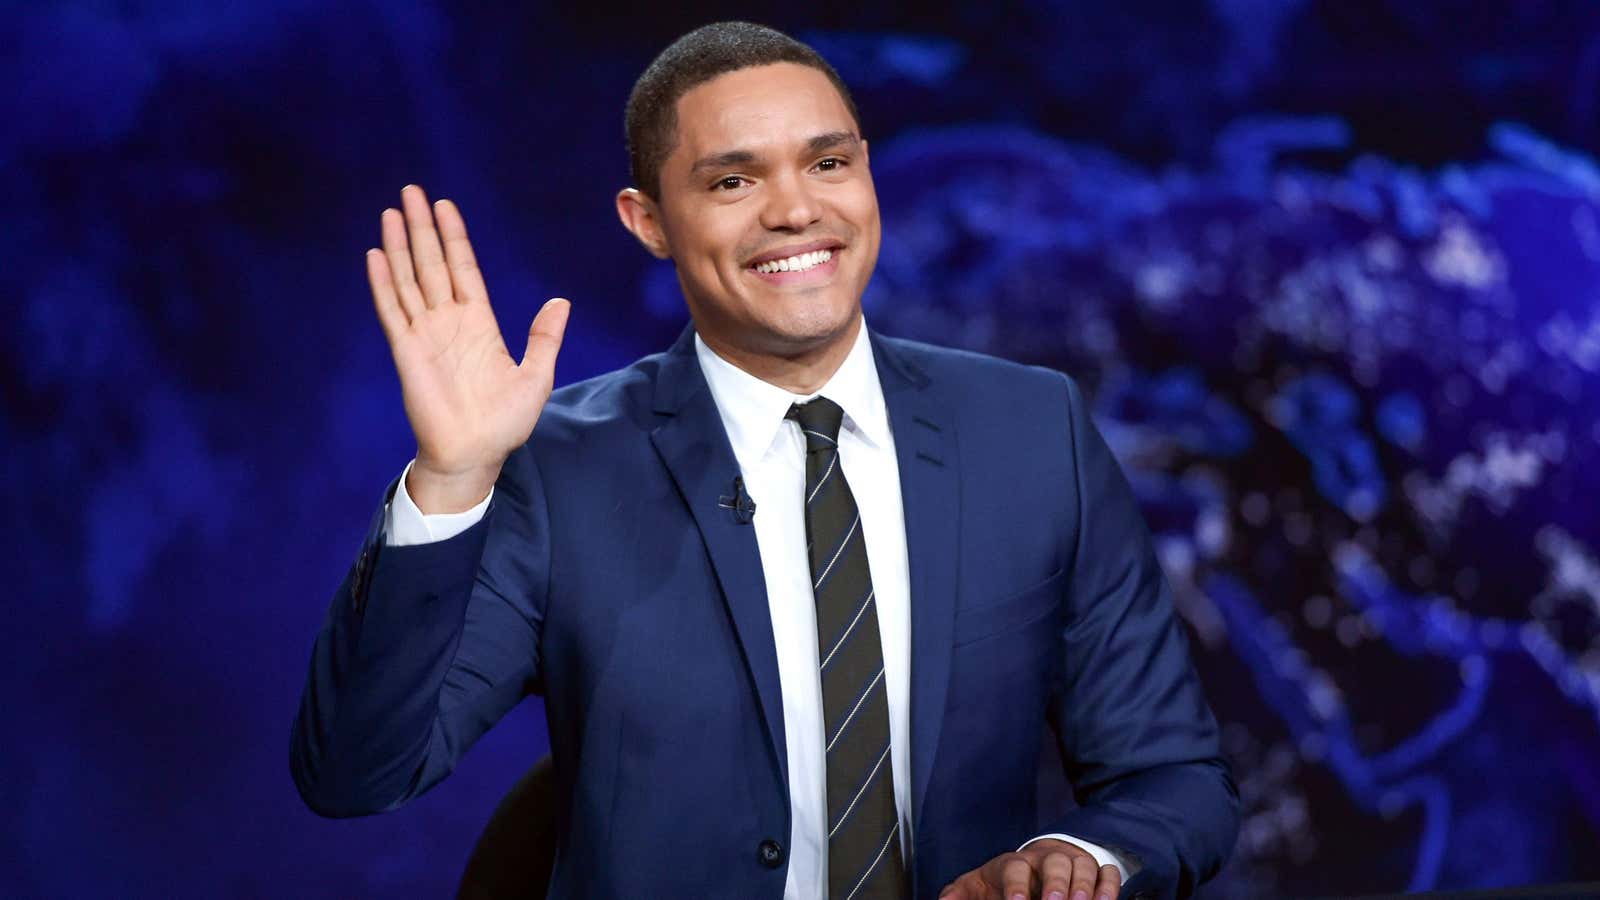 Trevor Noah weighed in on the meaning of French identity. But does he understand it himself?